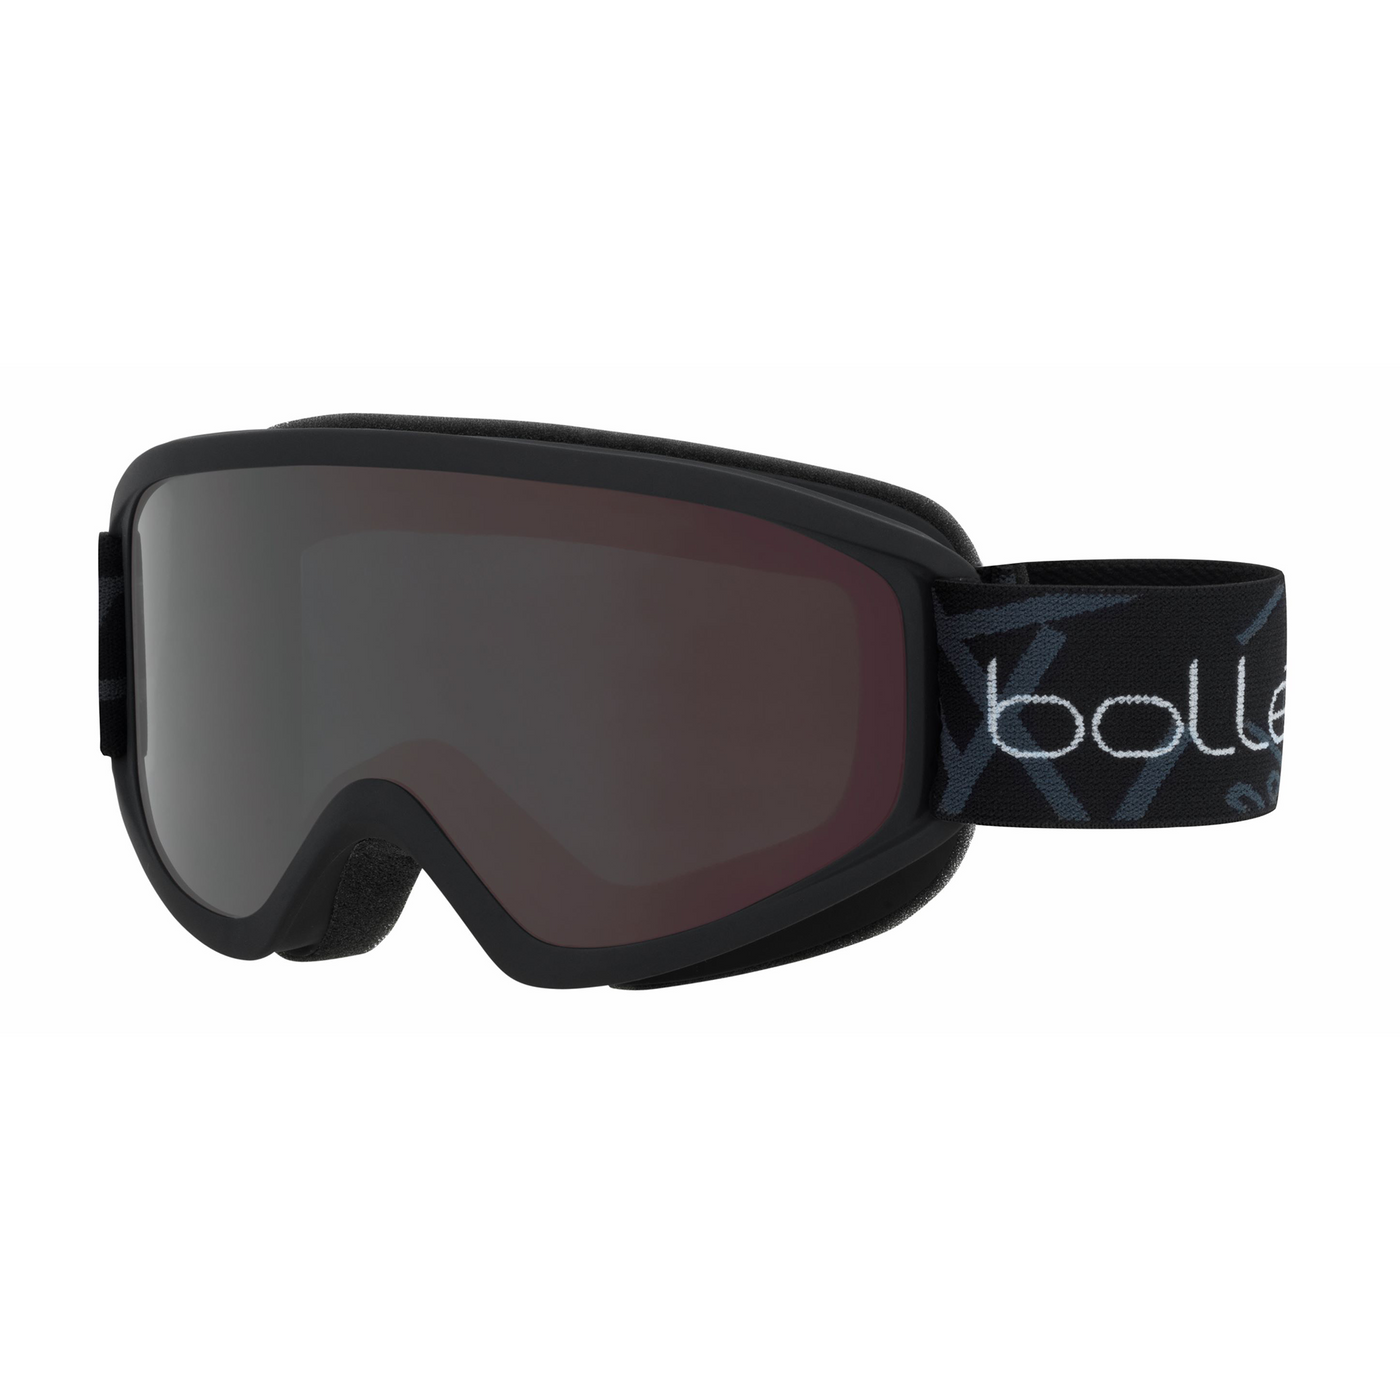 Bollé Freeze Ski Goggles - DISCONTINUED GOGGLES Bolle Matte Black with Grey Lens  